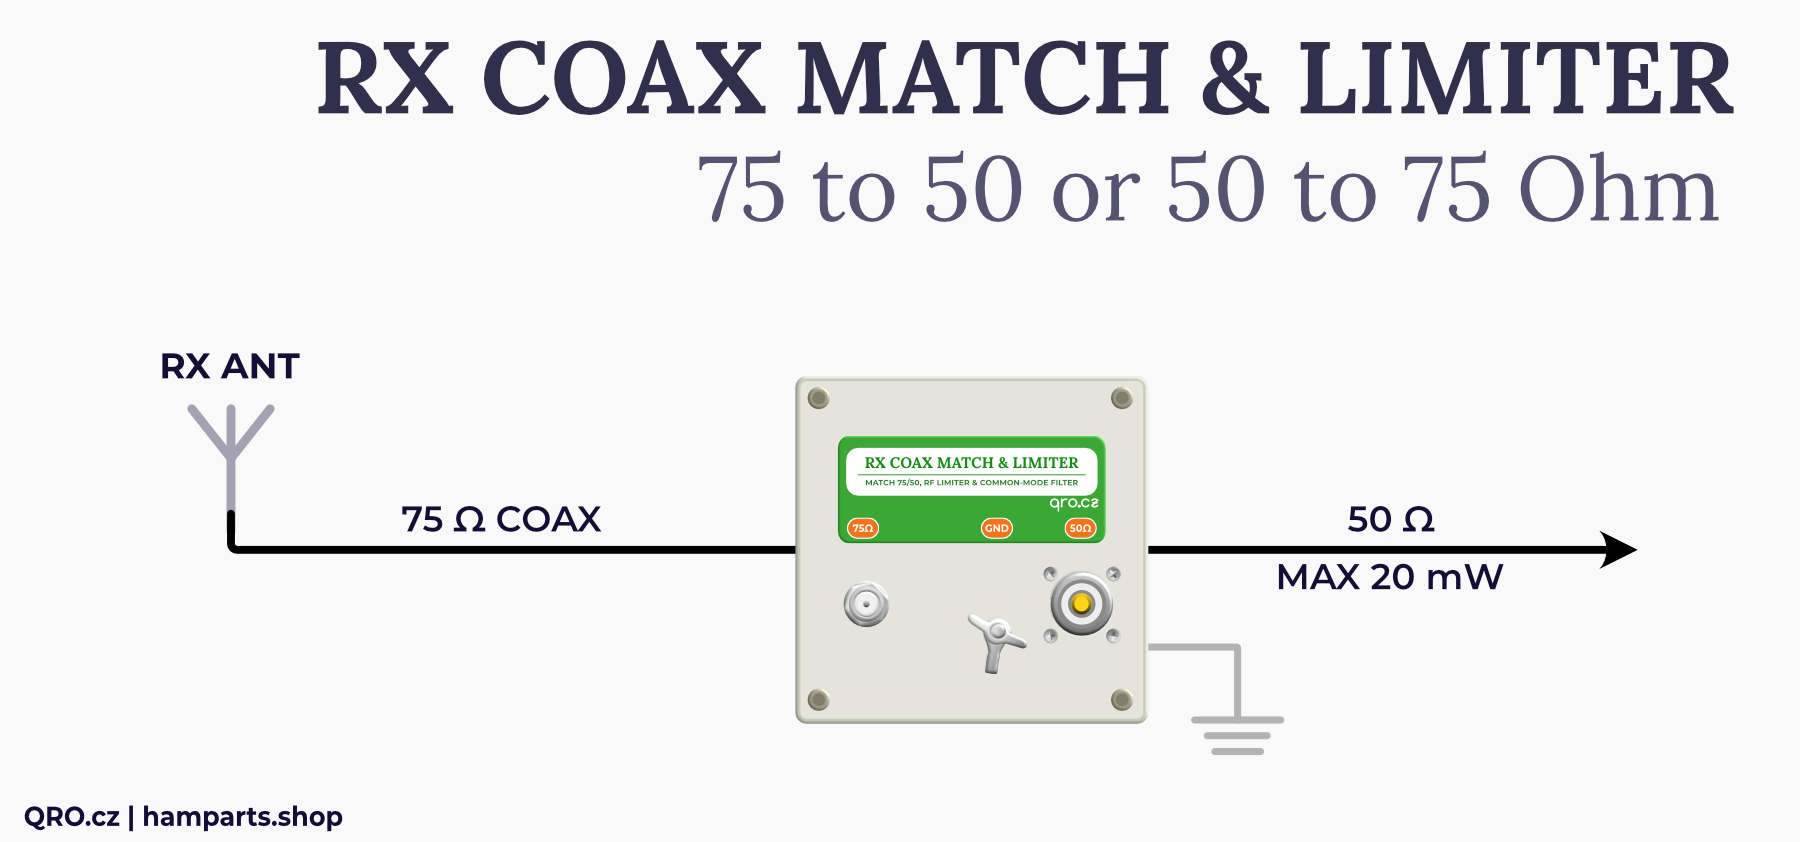 rx coax match limiter with common mode current filter by qro.cz hamparts.shop